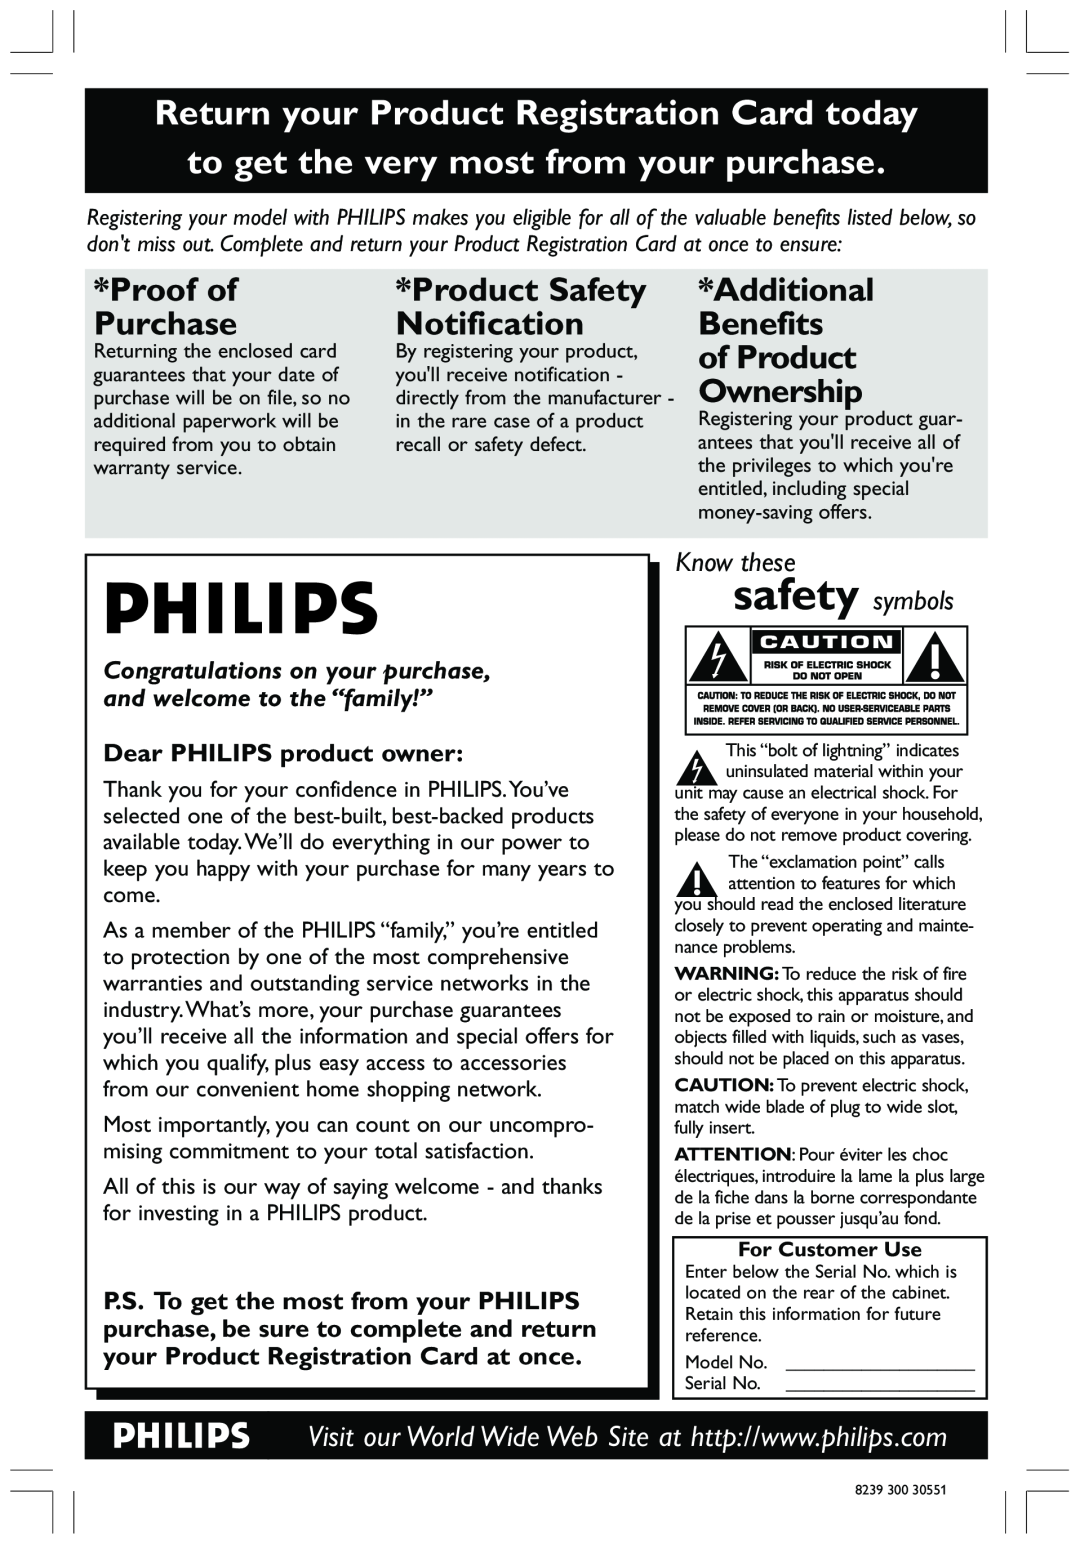 Philips HTS3410D user manual Proof of, Product Safety, Additional, Purchase, Notification, Benefits, of Product, Ownership 